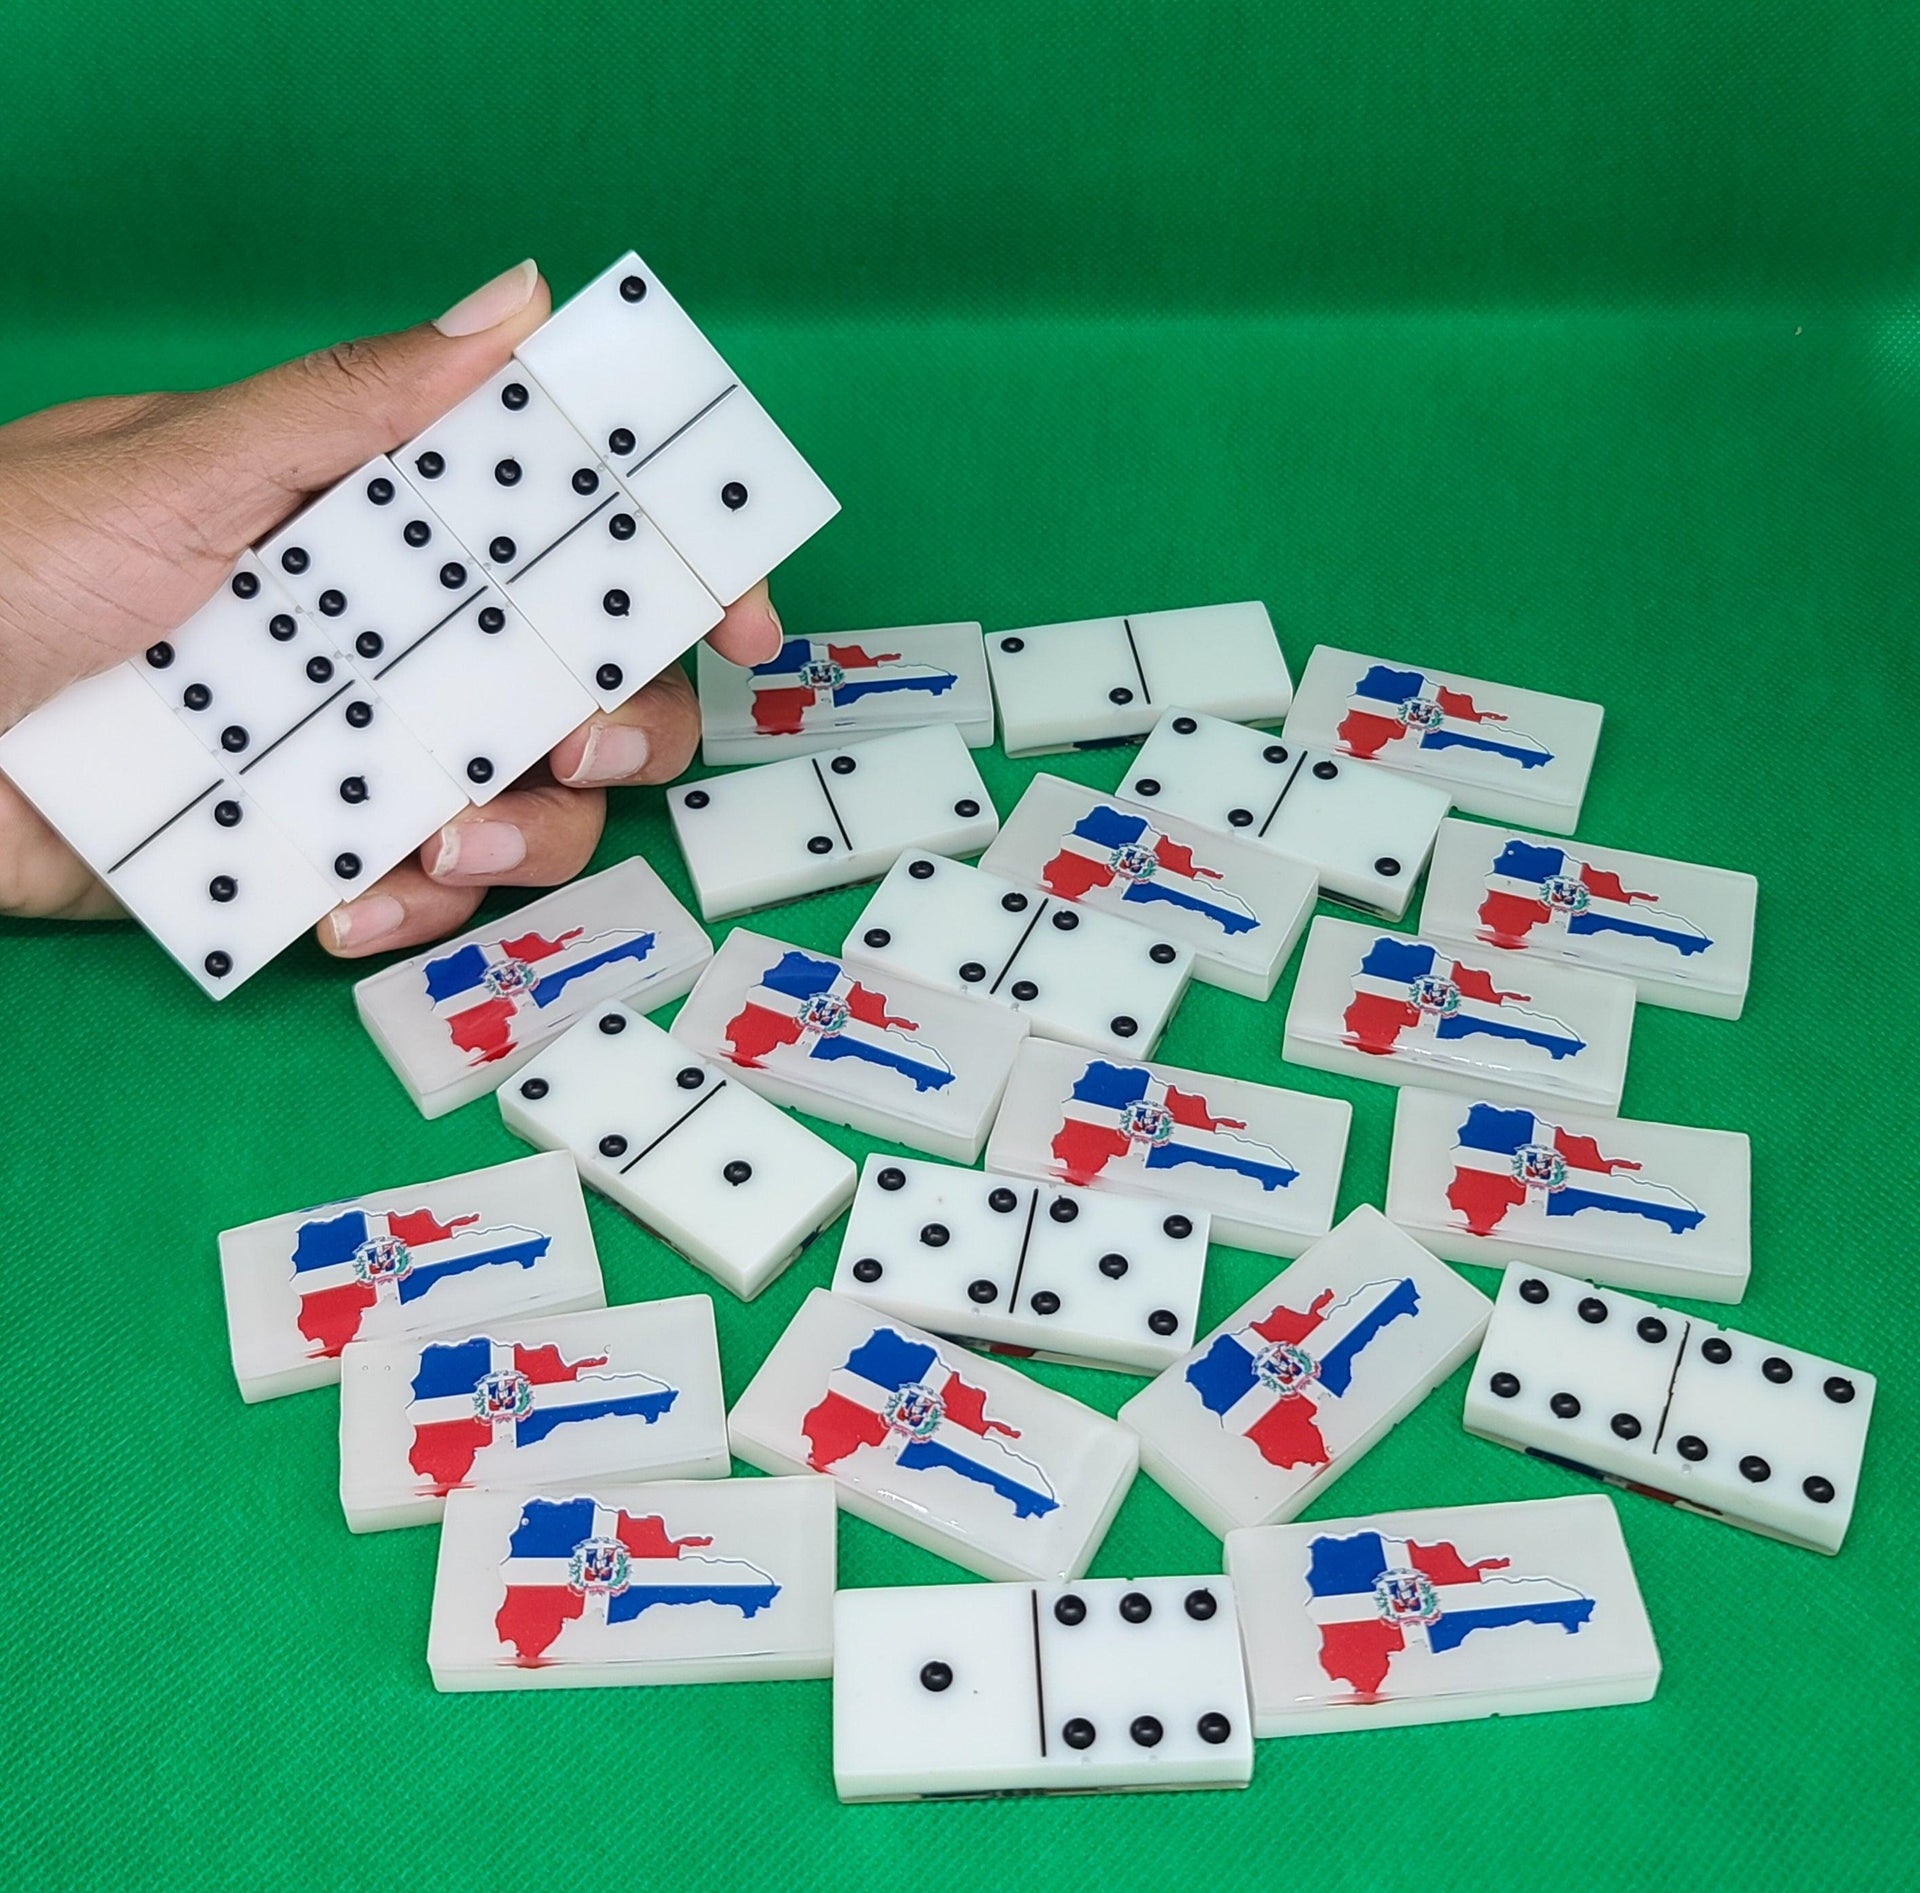 Domino Set 28 with Dominican Republic Map and Flag, Customized, Handmade Resin, dominoes for gift - Art By Suleny Craft Store LLC